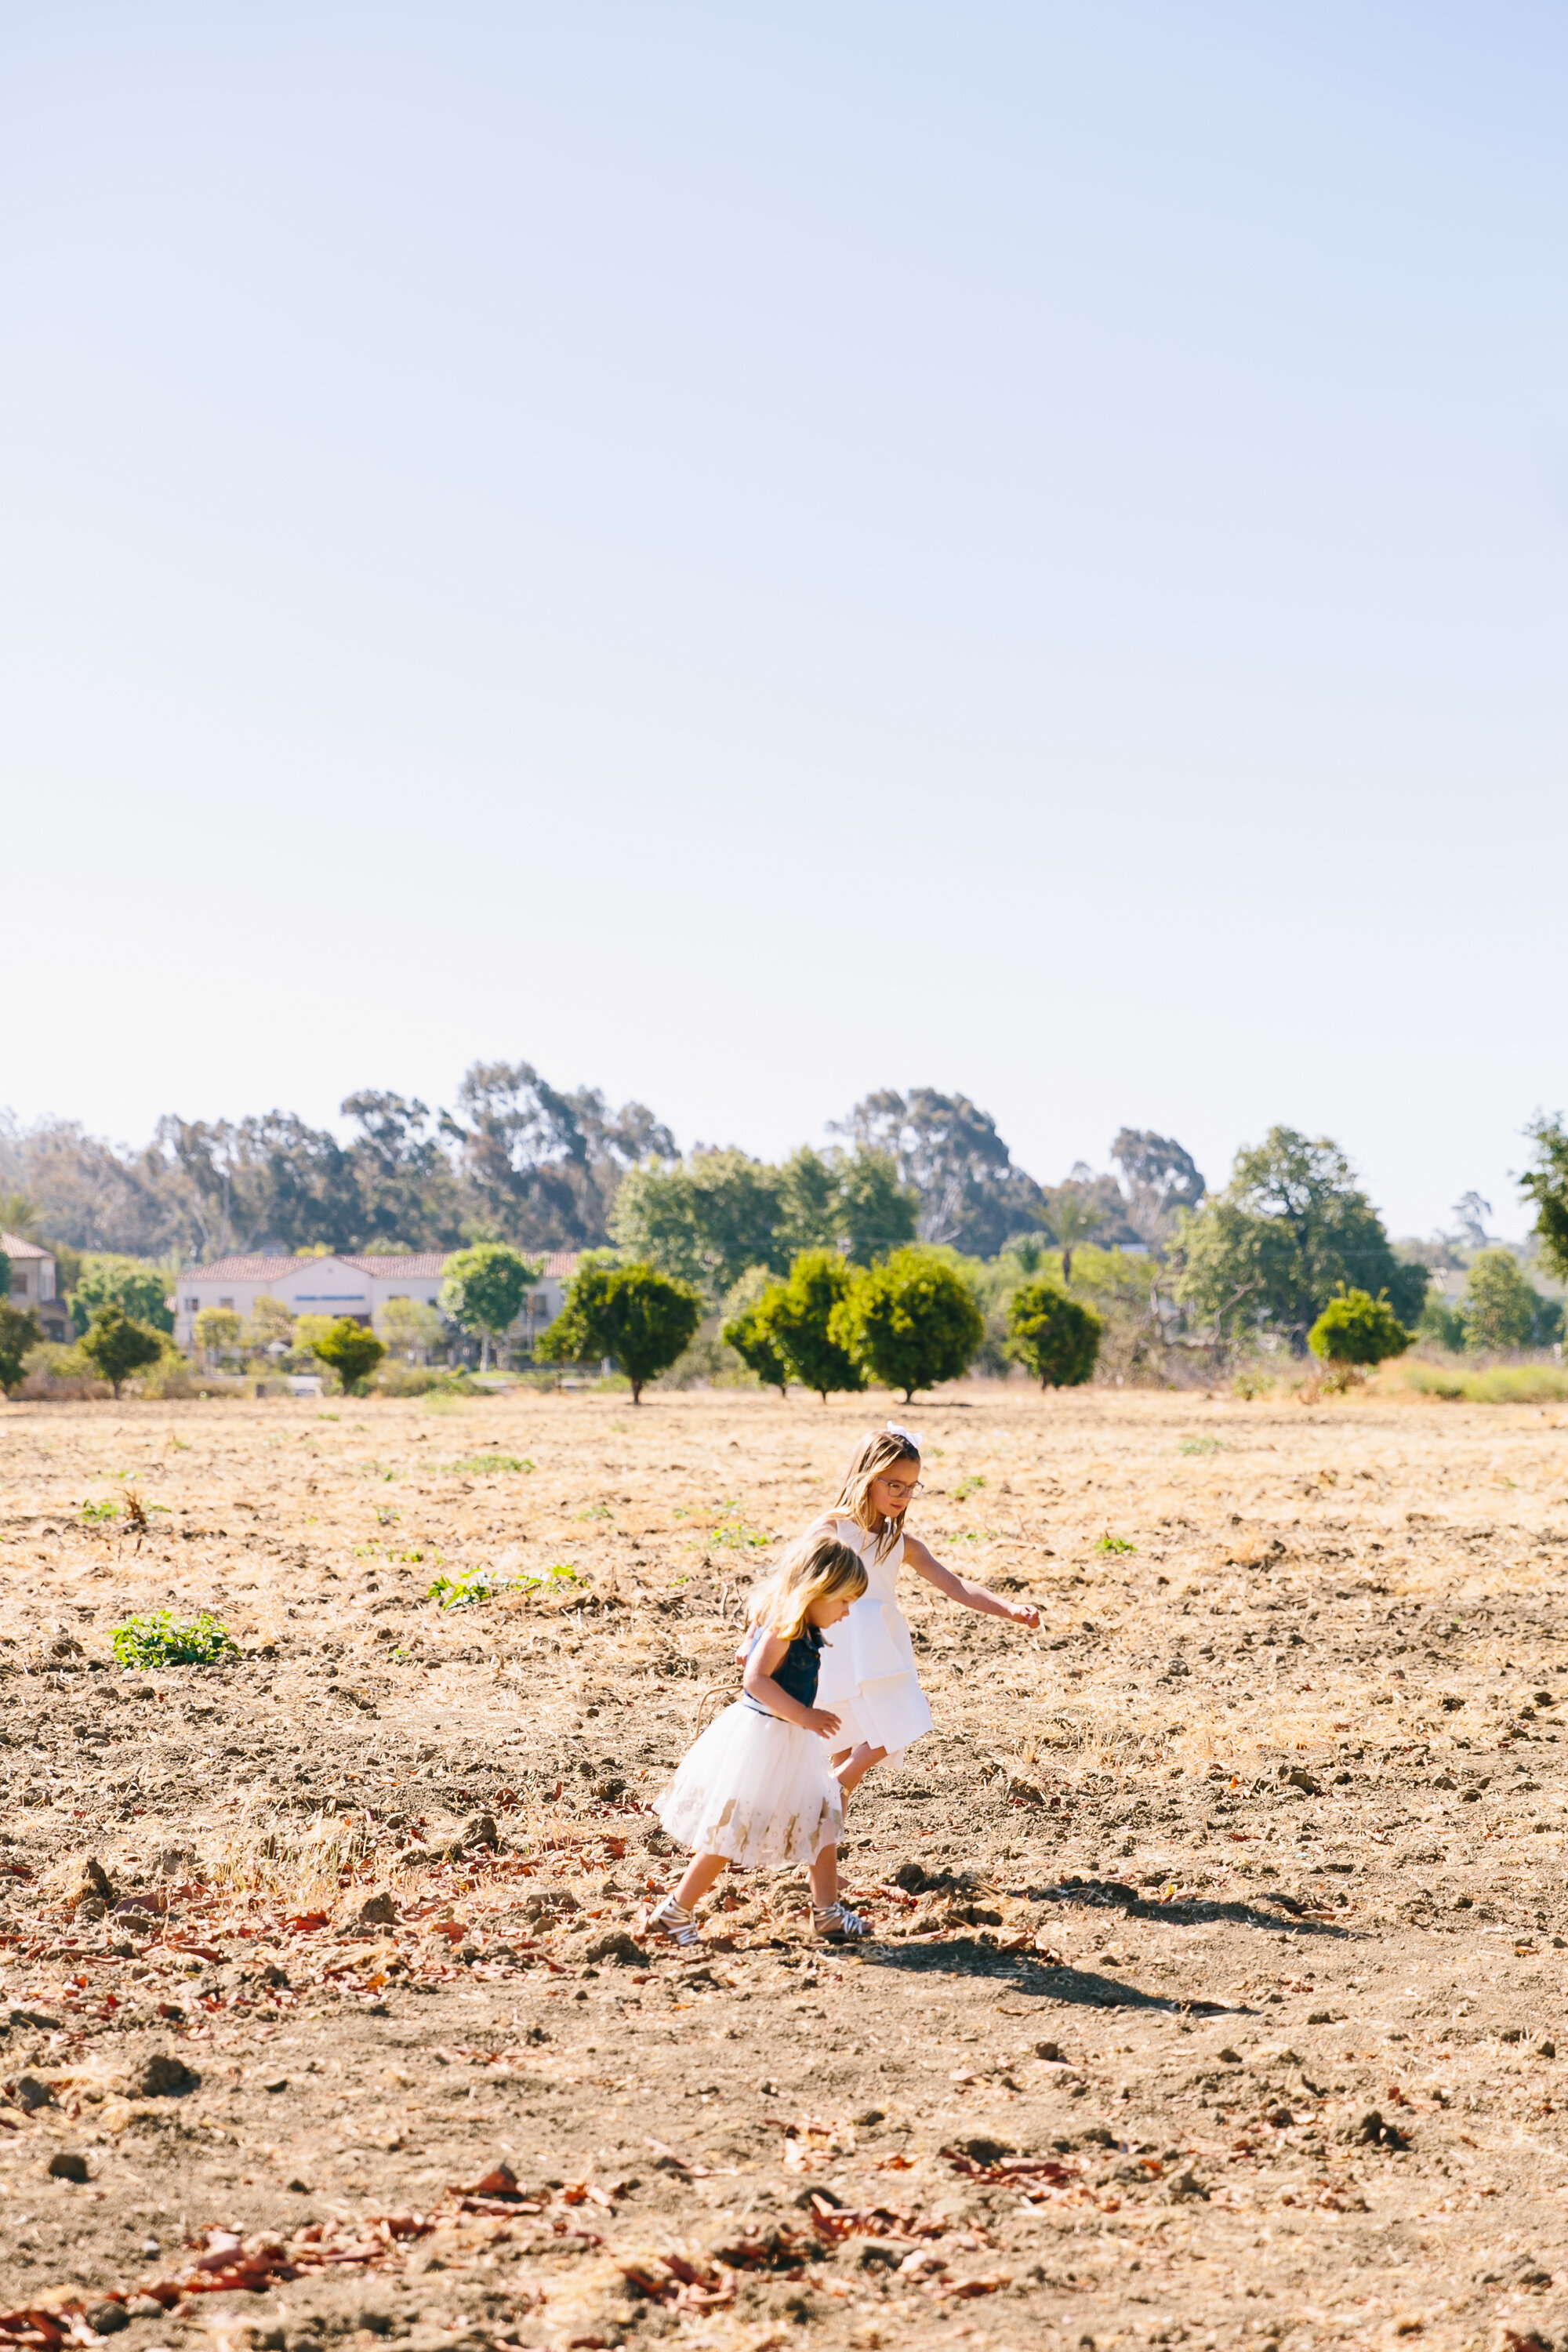 Los_Angeles_Family_Photography_Orange_County_Children_Babies_Field_Farm_Outdoors_Morning_Session_California_Girls_Boys_Kids_Photography-1121.jpg